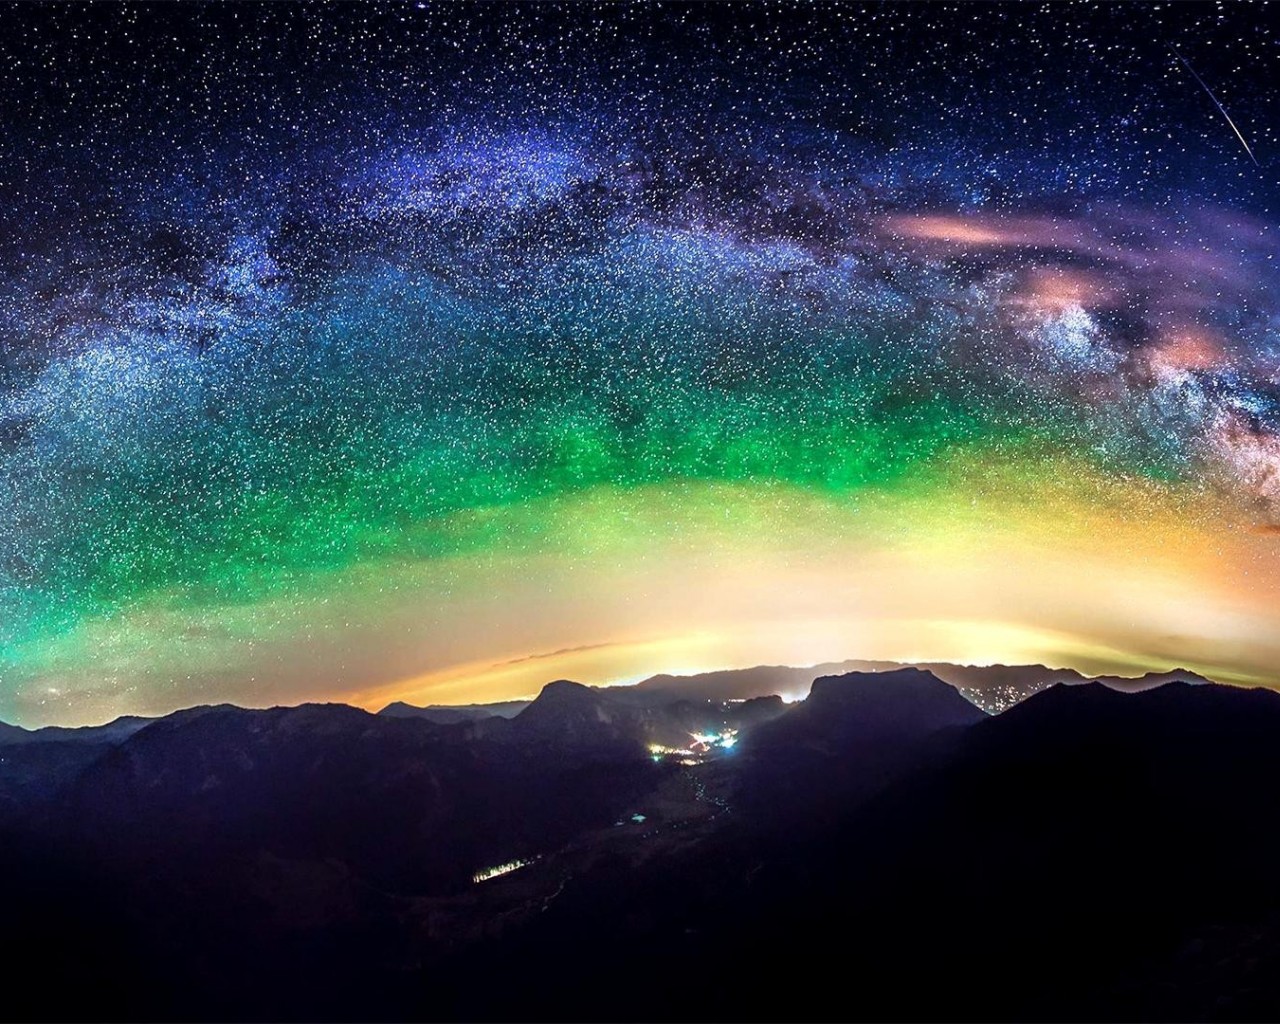 Milky Way Galaxy Pictures Wallpaper By Haim Zafra On